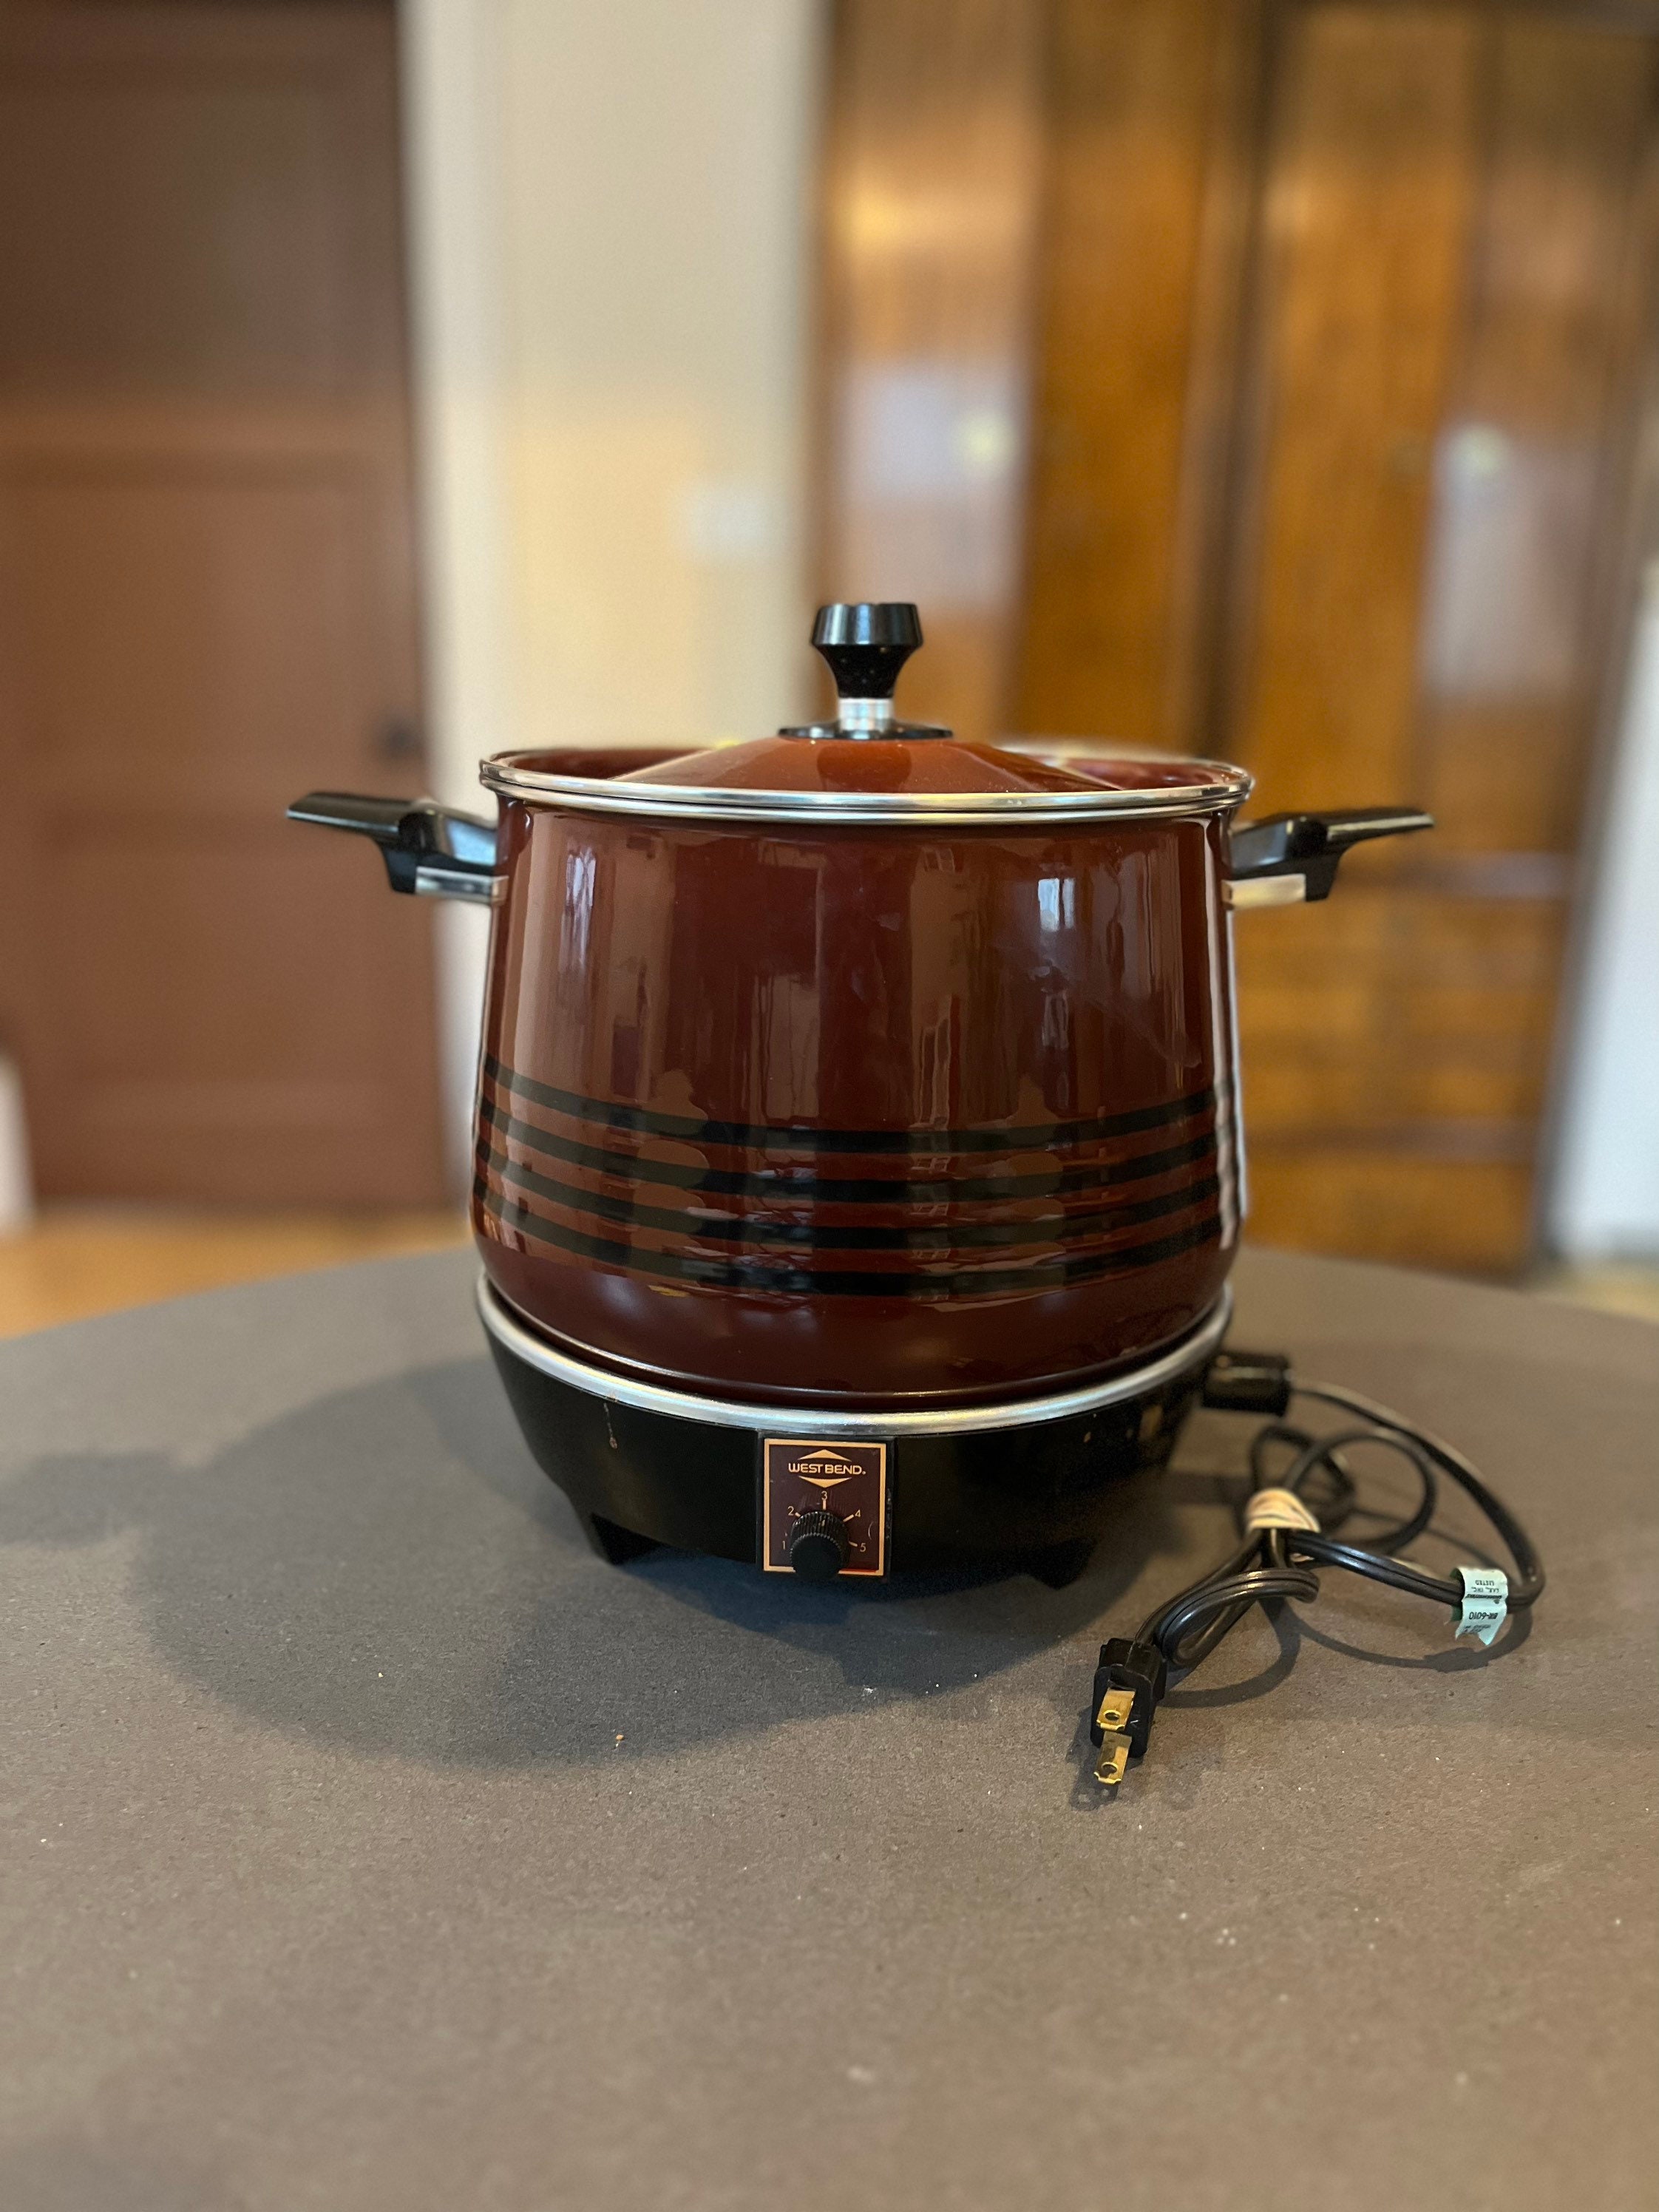 West Bend 6-Quart Red Rectangle Slow Cooker in the Slow Cookers